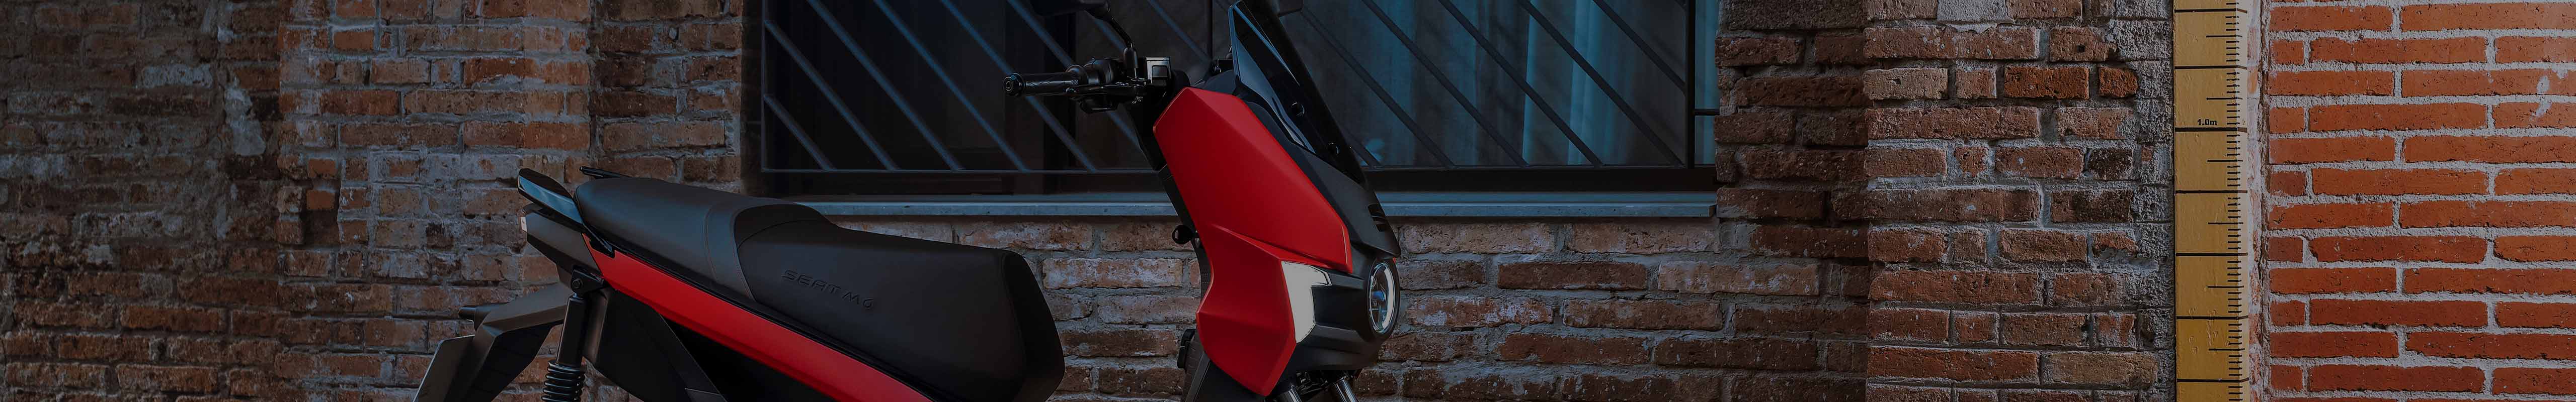 SEAT’s first electric motorbike.